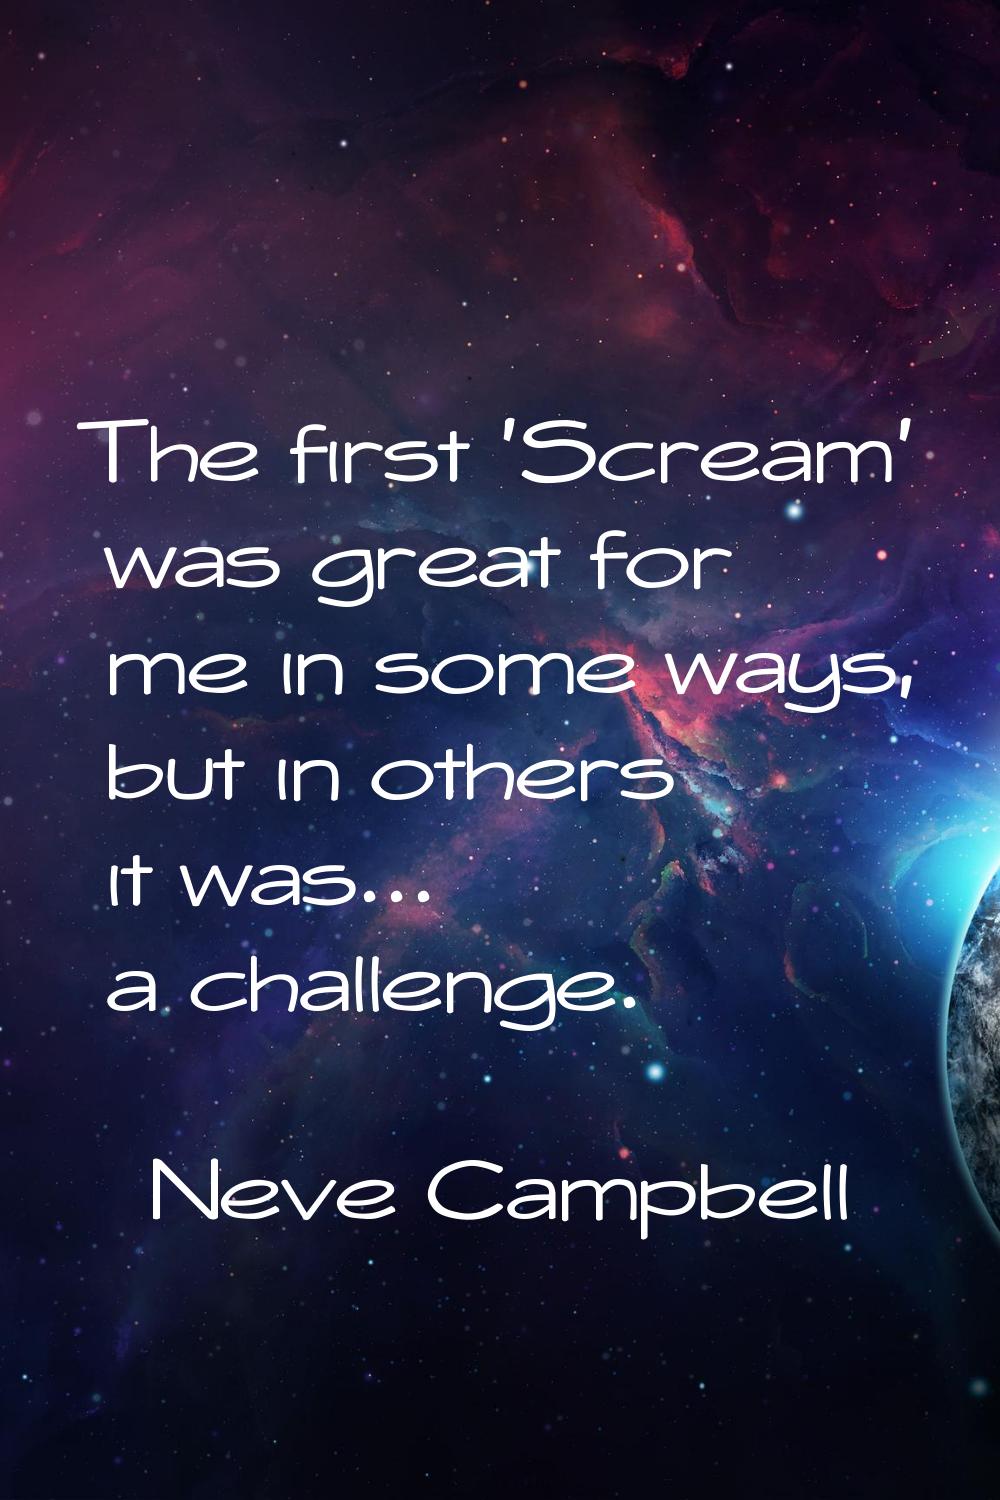 The first 'Scream' was great for me in some ways, but in others it was... a challenge.